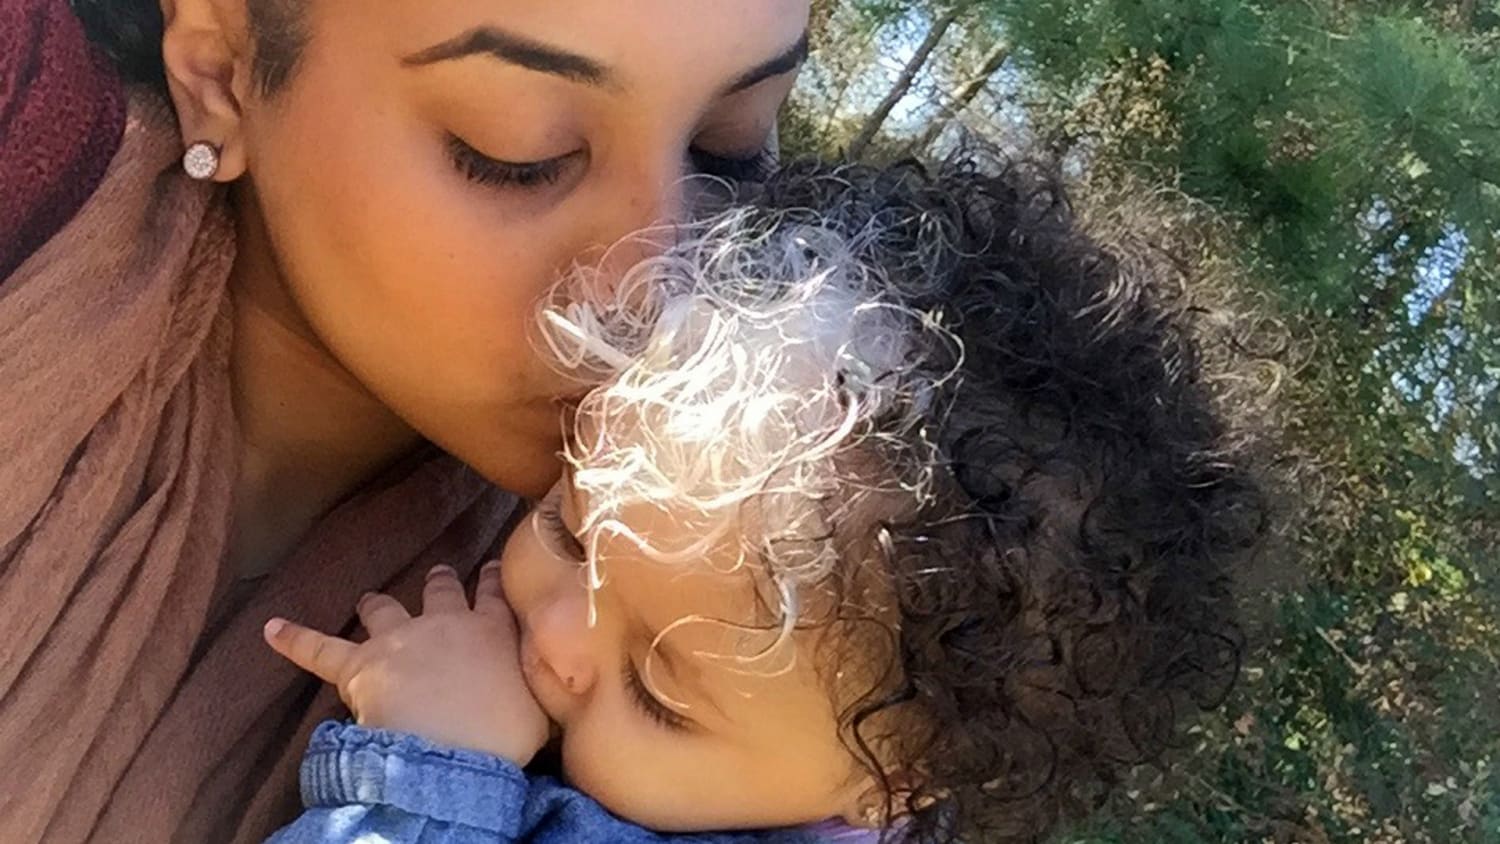 Why this mom and daughter share the same beautiful streak of white hair